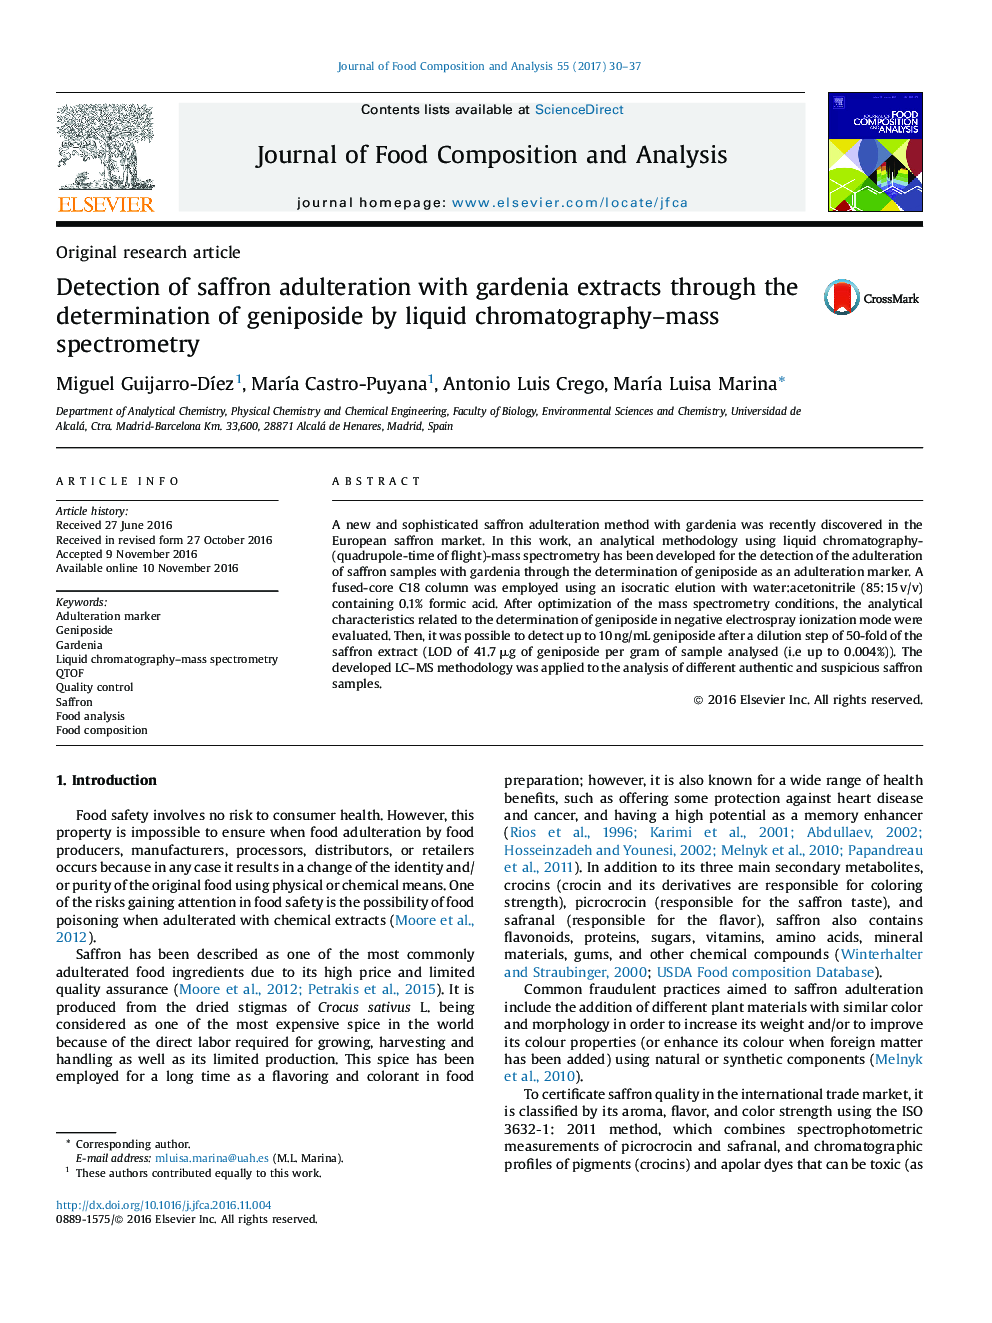 Original research articleDetection of saffron adulteration with gardenia extracts through the determination of geniposide by liquid chromatography-mass spectrometry